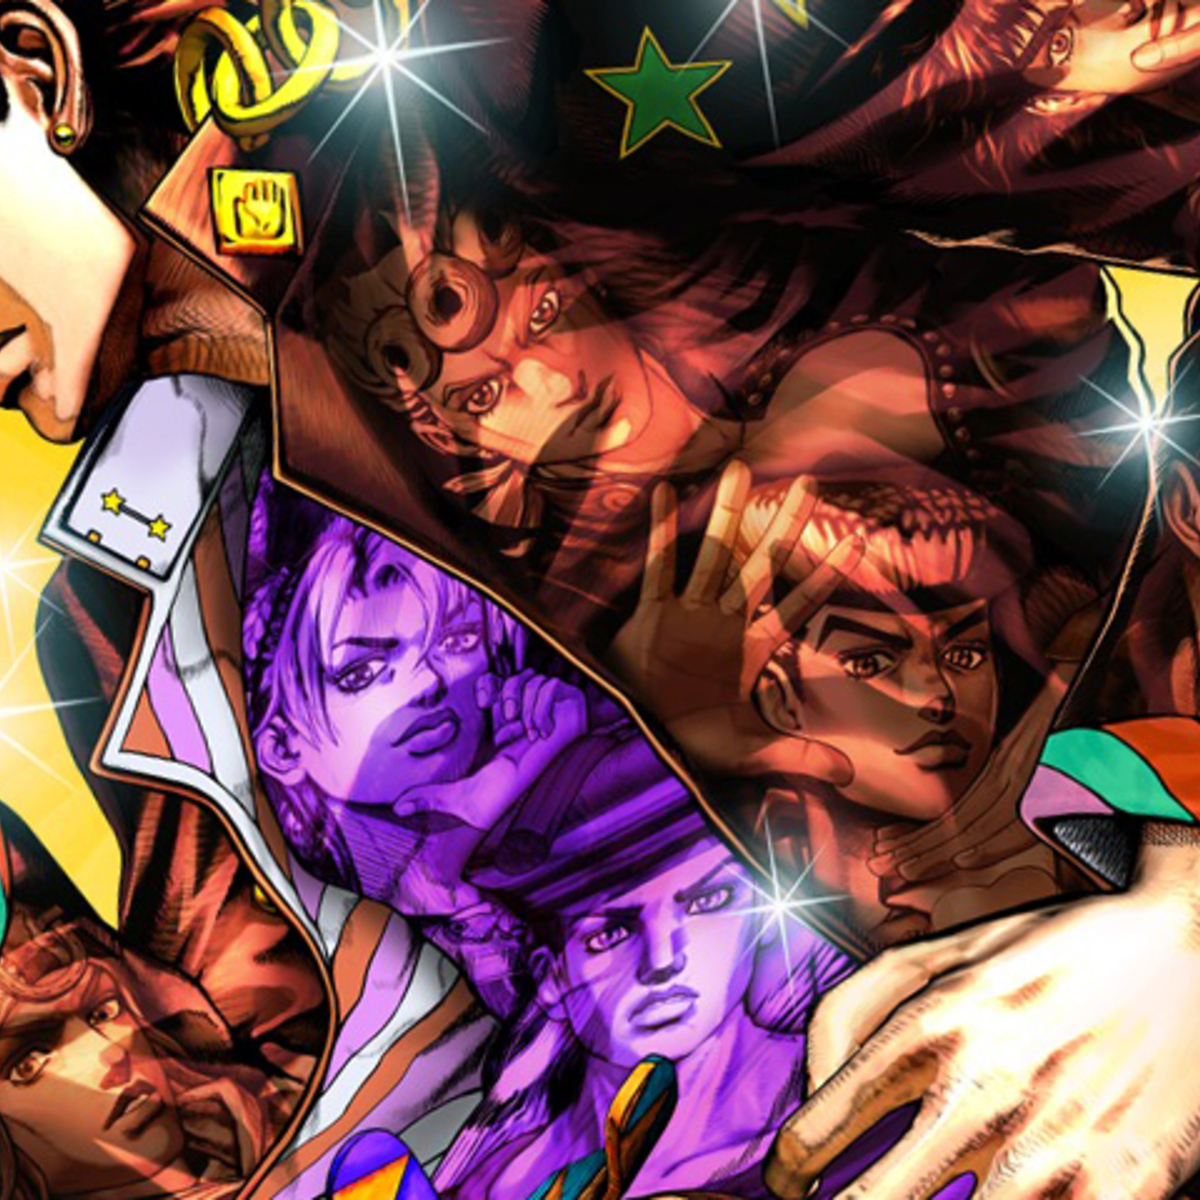 JoJo's Bizarre Adventure: Eyes of Heaven in the works for PS3 and PS4